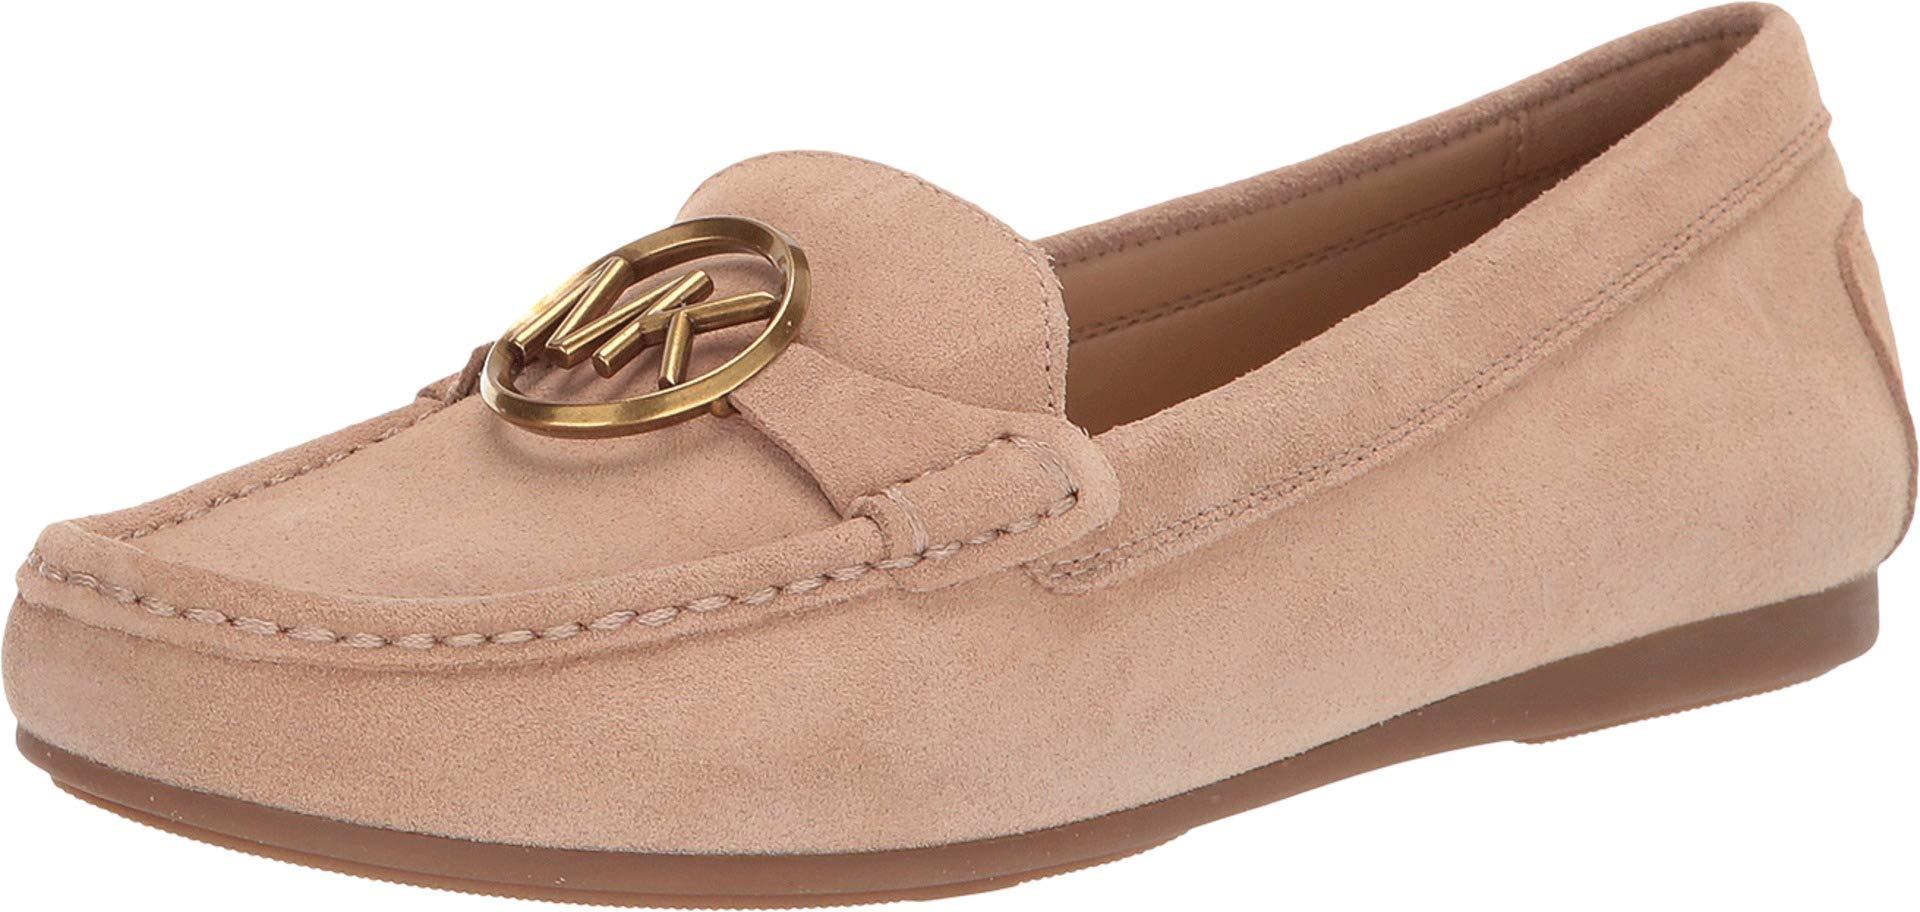 michael kors crawford moccasin,Quality assurance,protein-burger.com